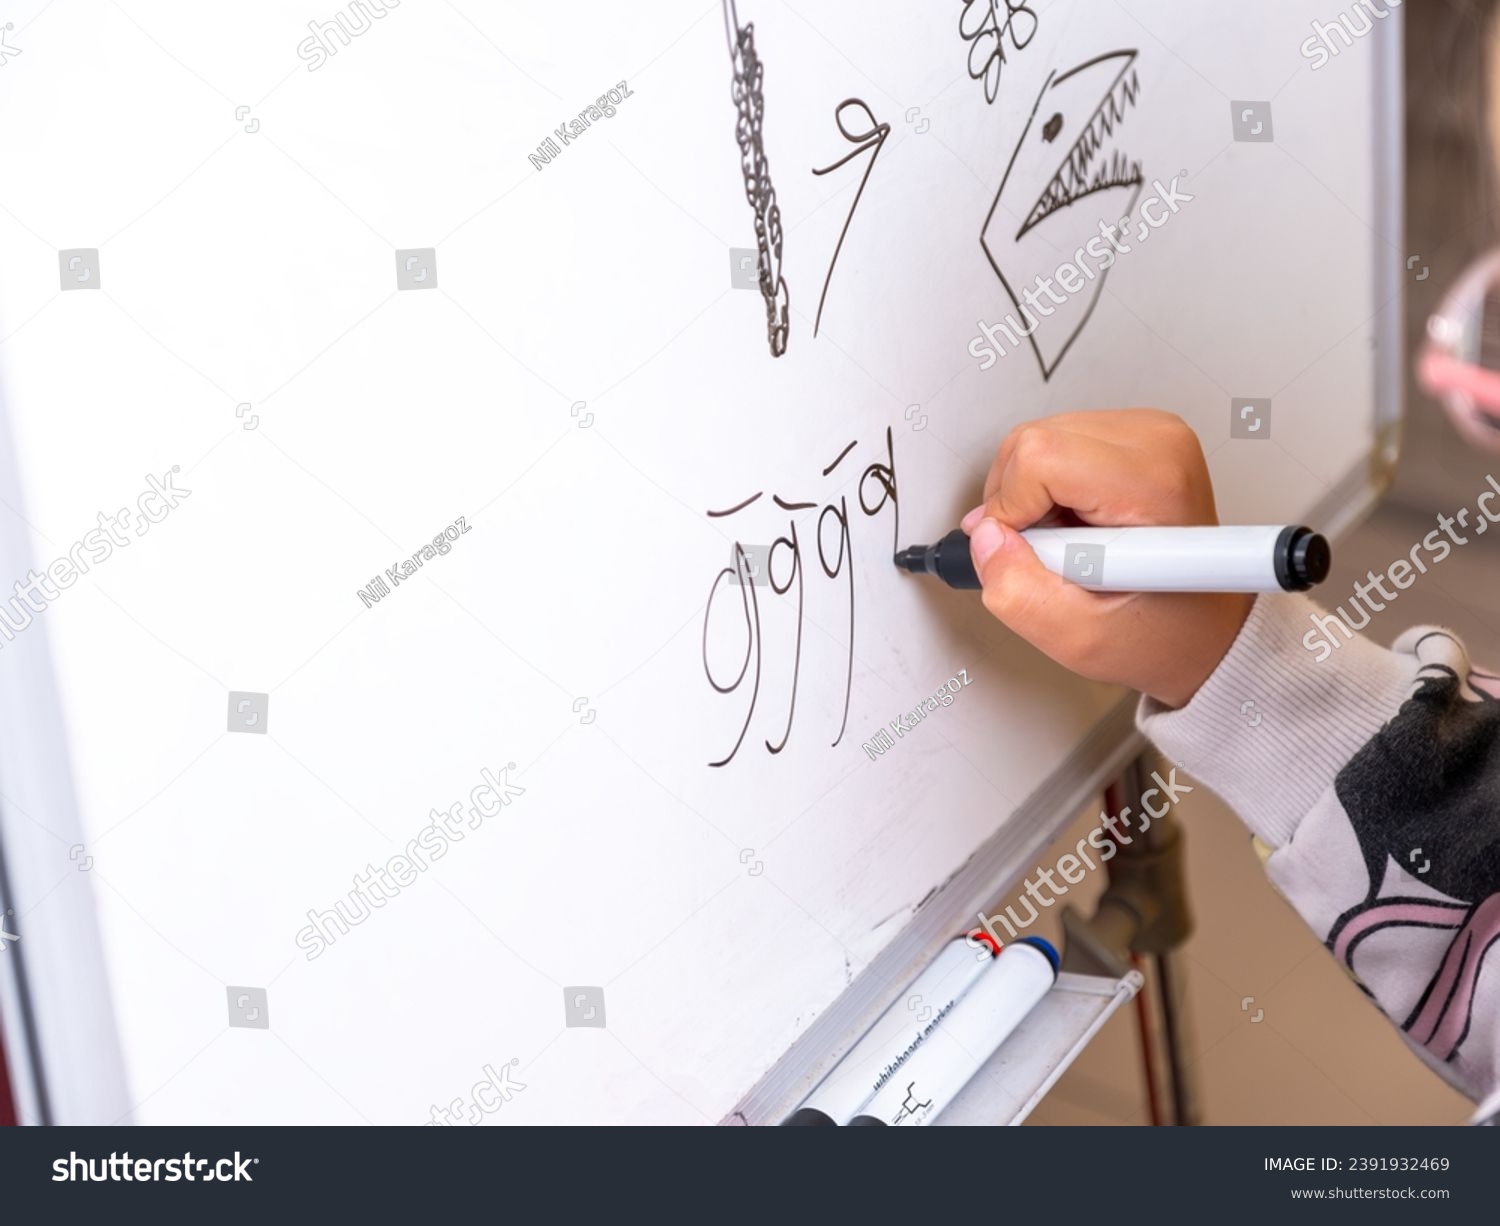 School girl trying to draw the letter g on the whiteboard. School girl learning how to draw. Close-up of school girl's hands drawing on white board.   #2391932469